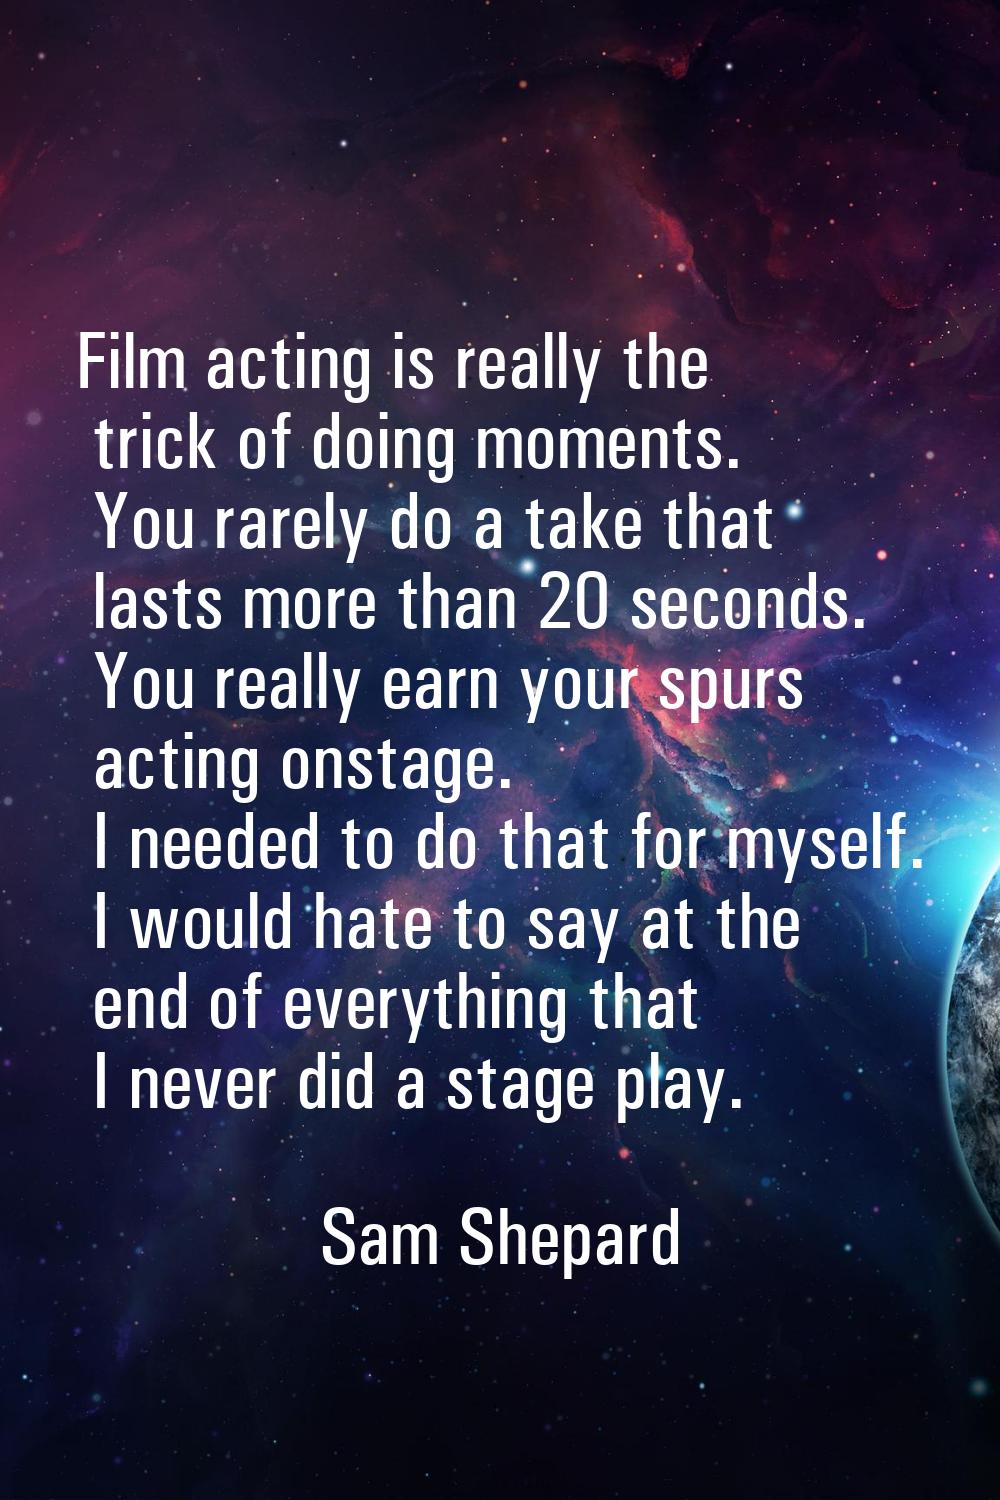 Film acting is really the trick of doing moments. You rarely do a take that lasts more than 20 seco